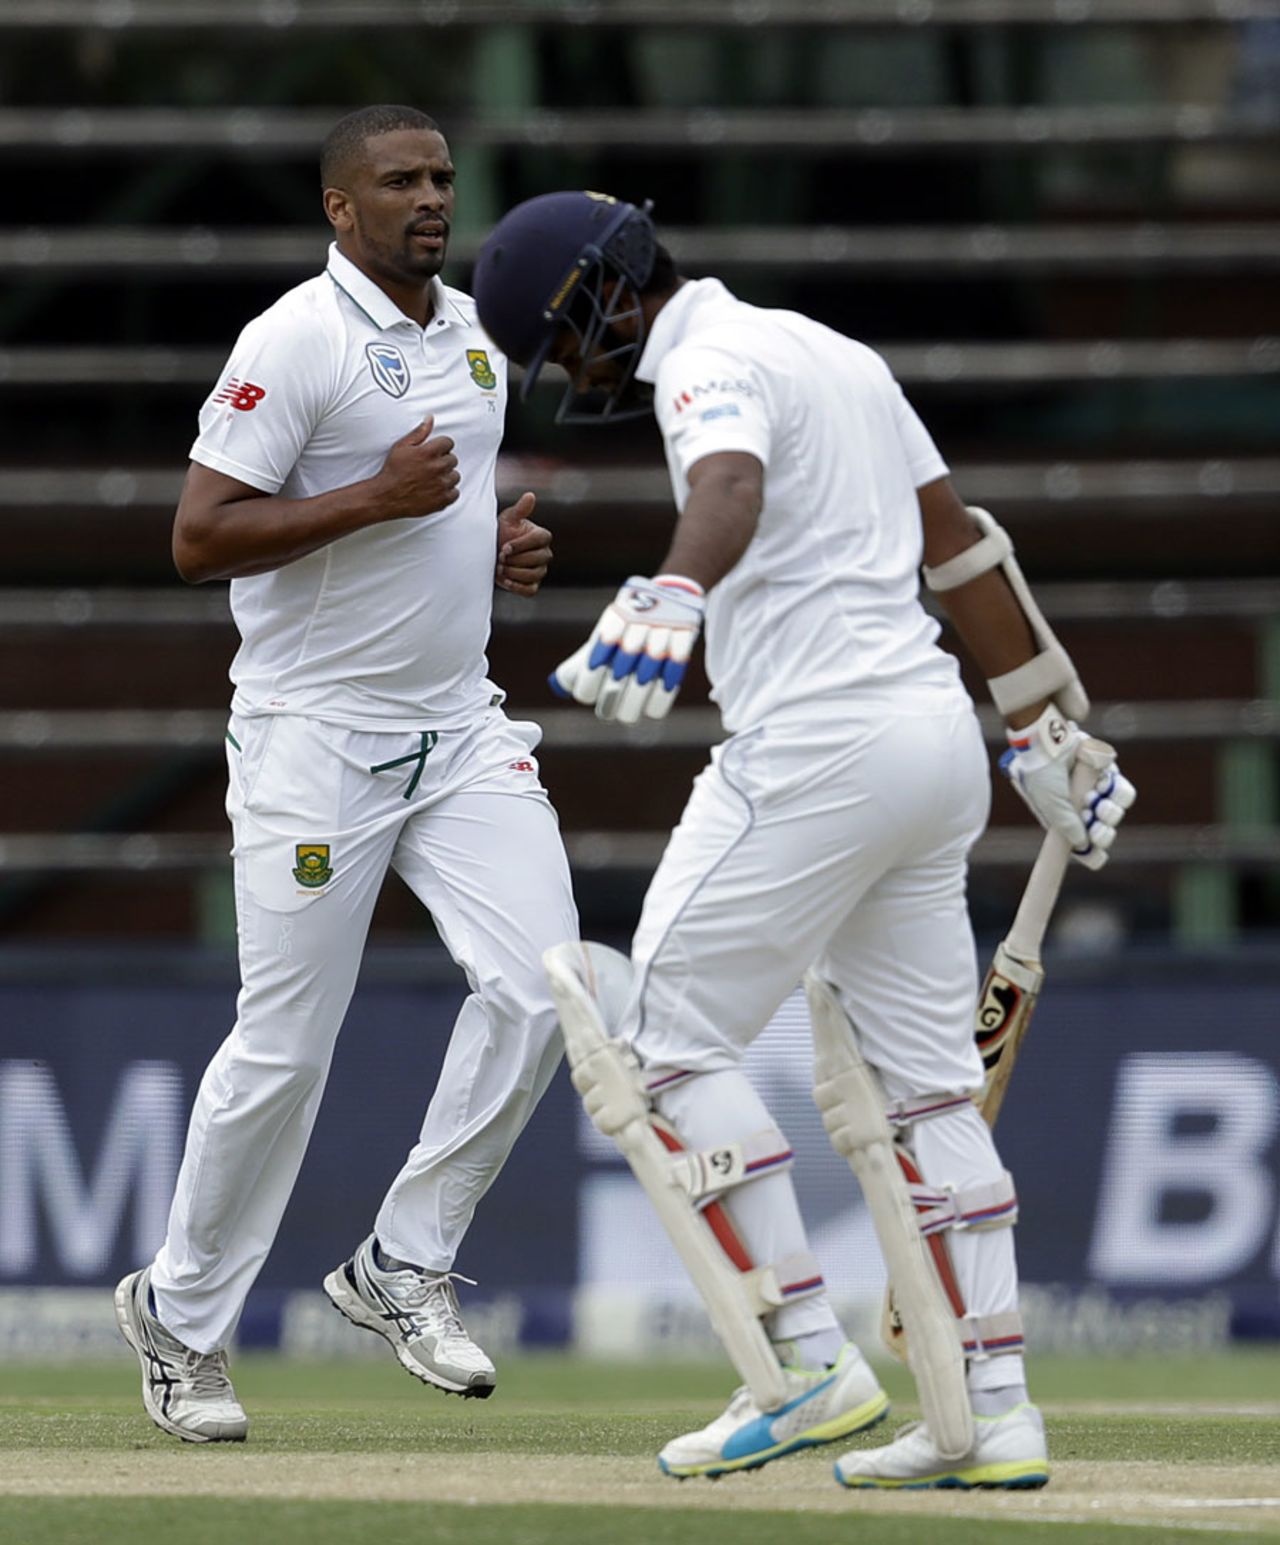 Vernon Philander removed Dimuth Karunaratne in the first over, South Africa v Sri Lanka, 3rd Test, Johannesburg, 2nd day, January 13, 2017